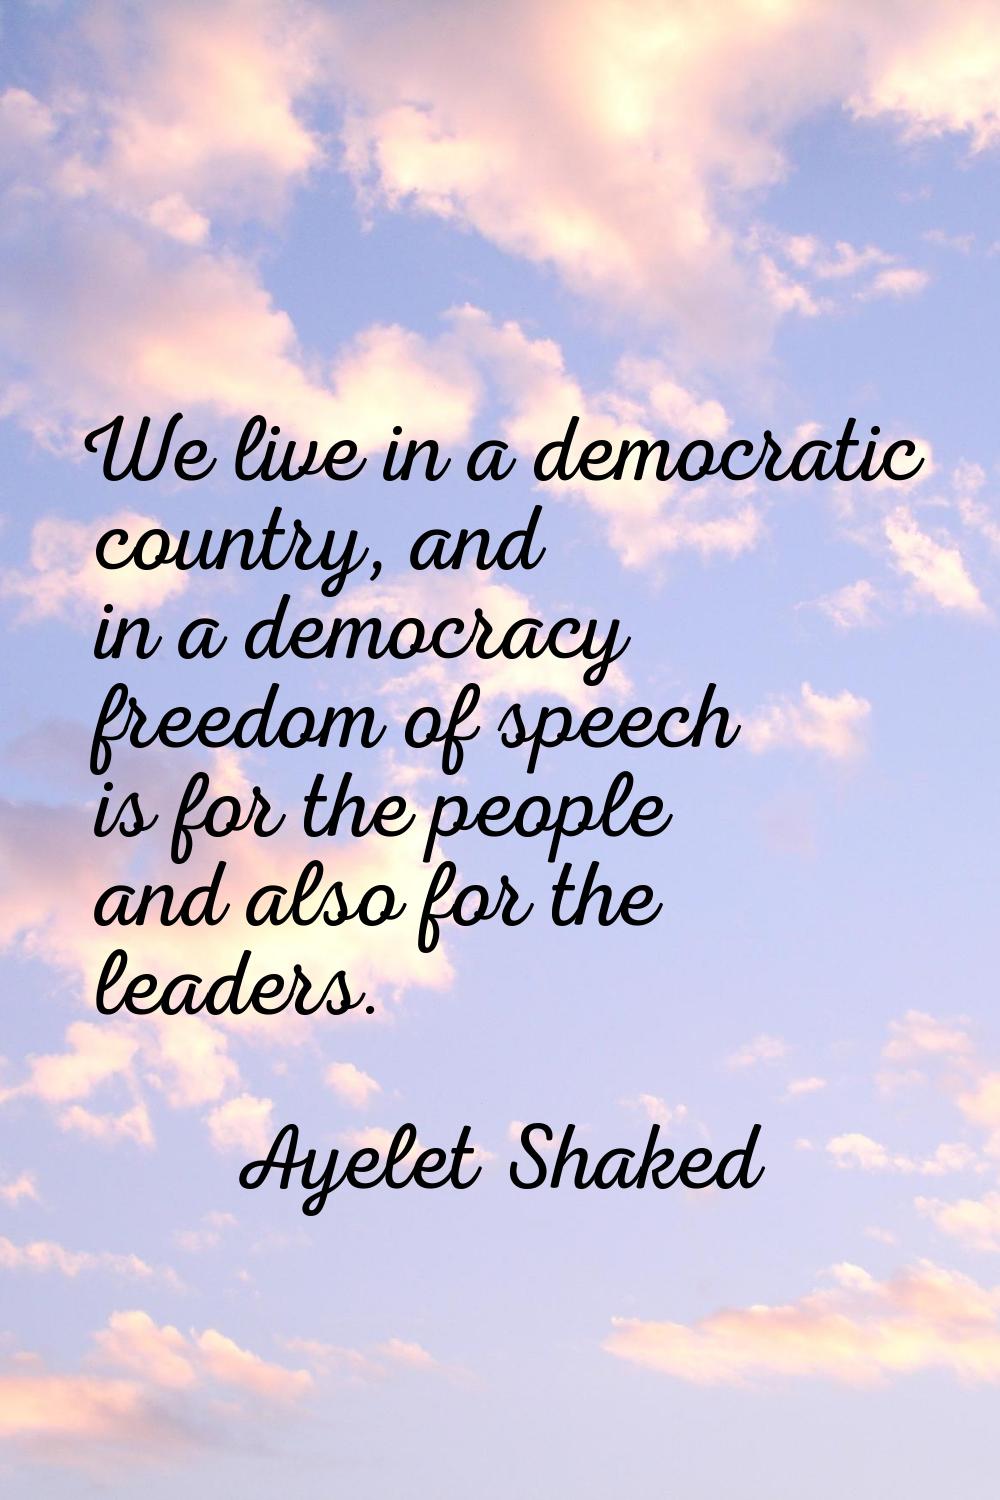 We live in a democratic country, and in a democracy freedom of speech is for the people and also fo